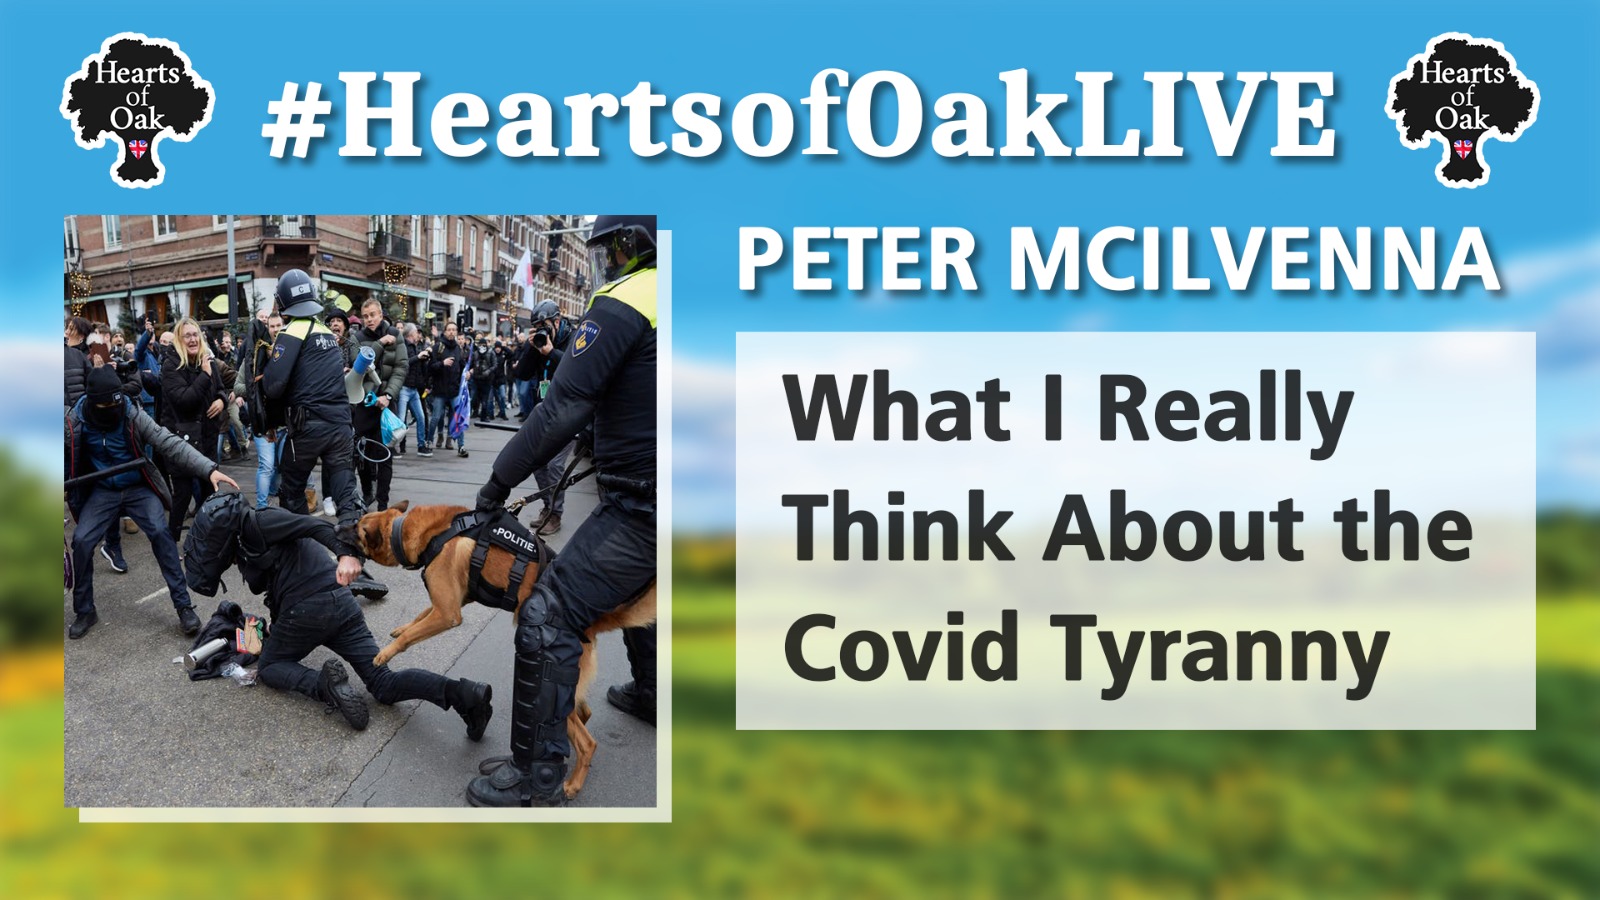 Peter Mcilvenna - What I Really Think About the COVID Tyranny